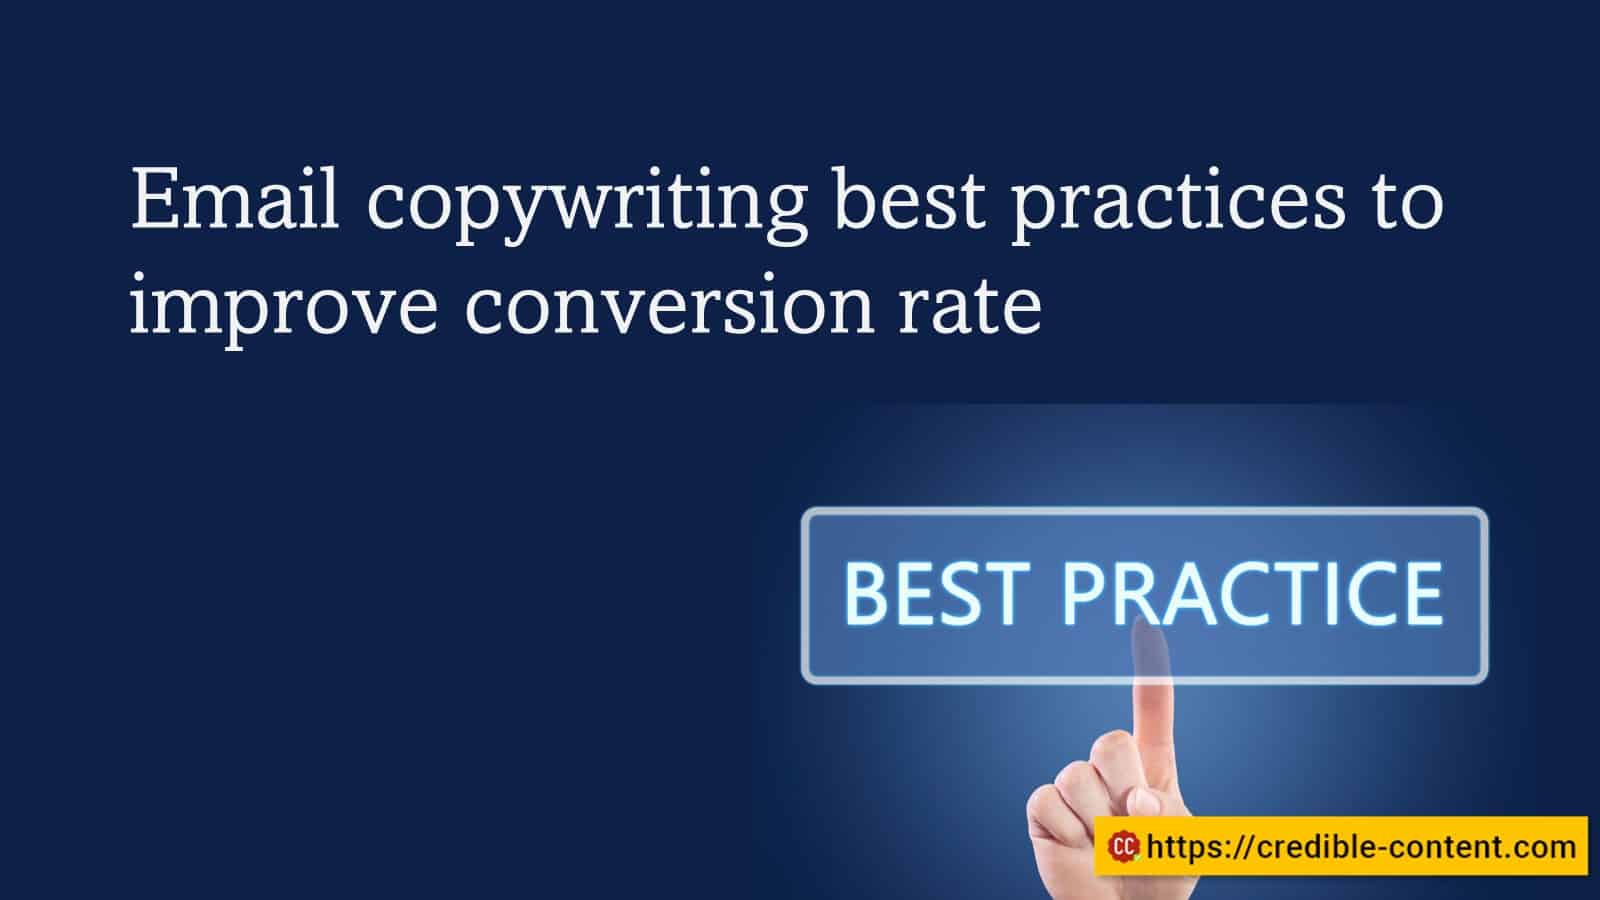 Better conversion rate – email copywriting best practices